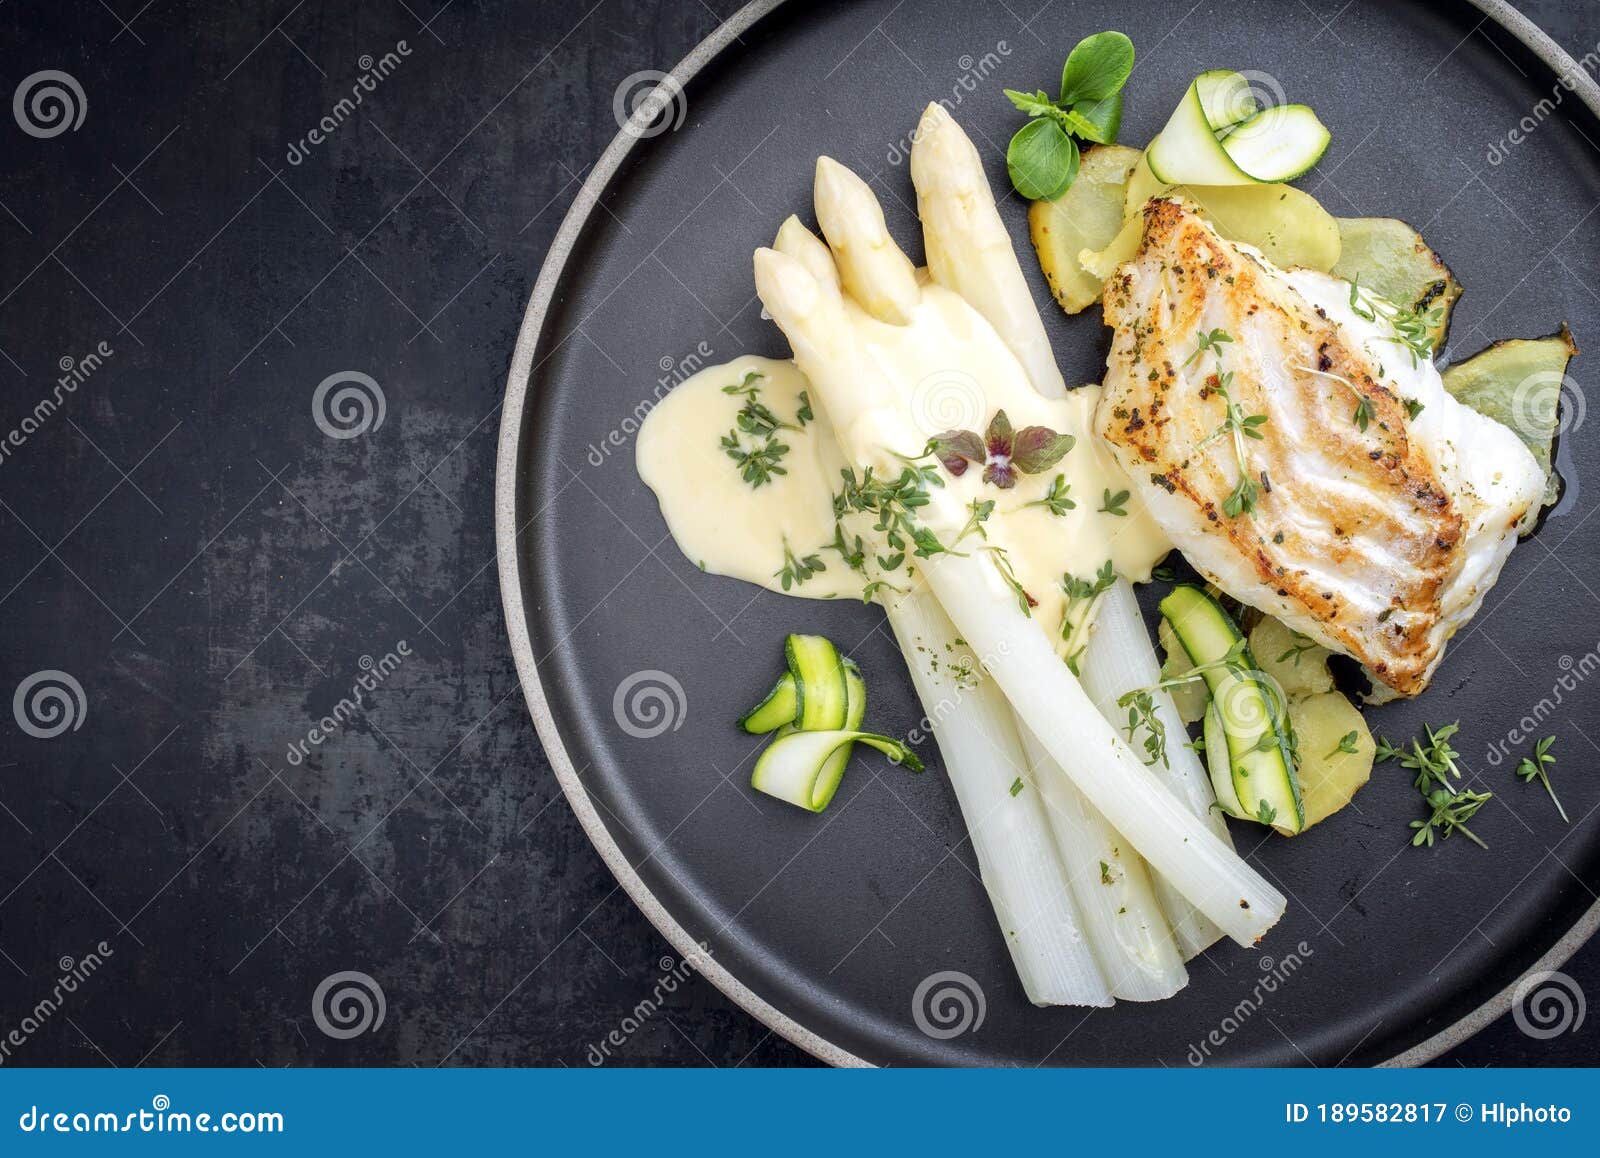 Modern Style German Fried Skrei Cod Fish Filet with White Asparagus in ...